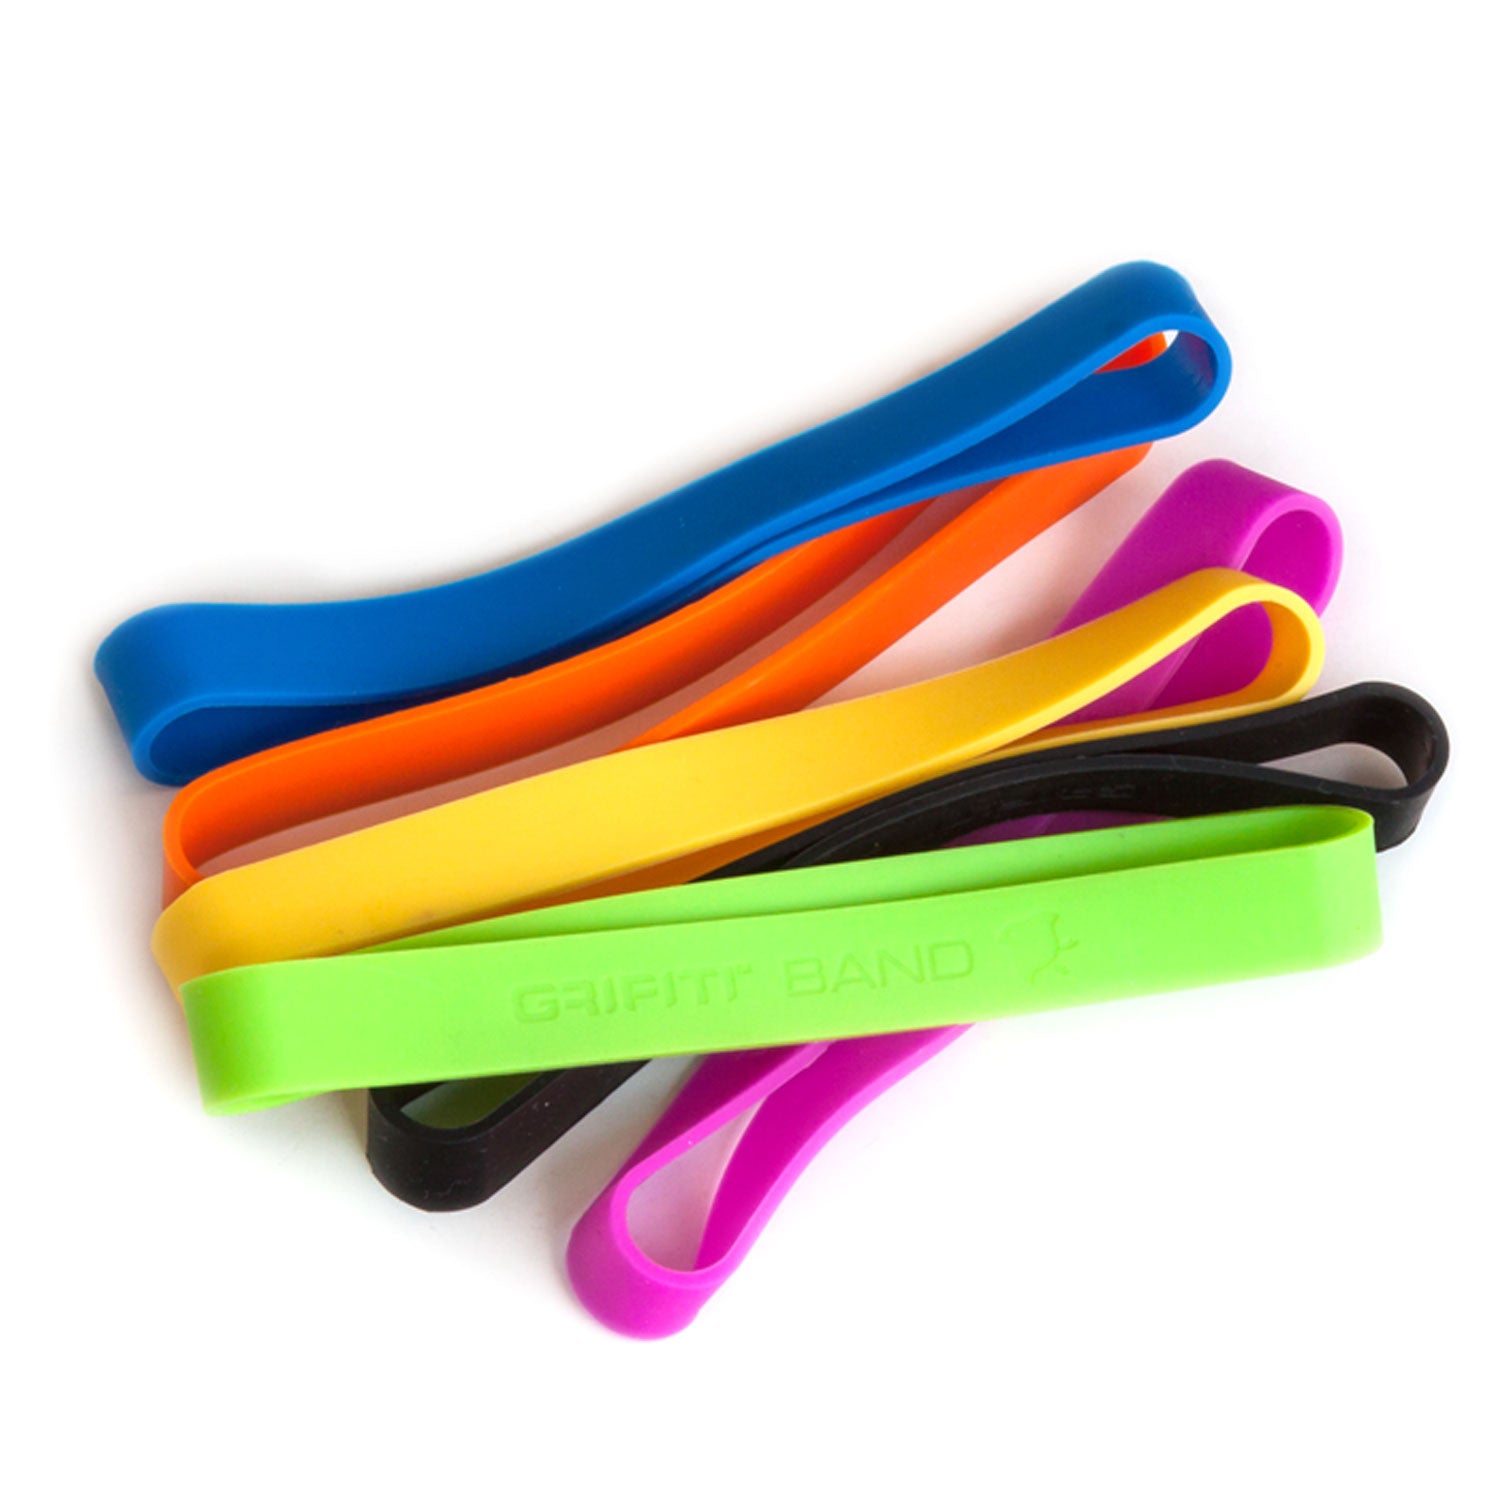 Grifiti Band Joes Grip Rubber Bands 5 x 2 Inch 5 Pack Long Lasting Assorted  Colorful Silicone Grip Cooking Grade Heat Cold UV Chemical Resistant